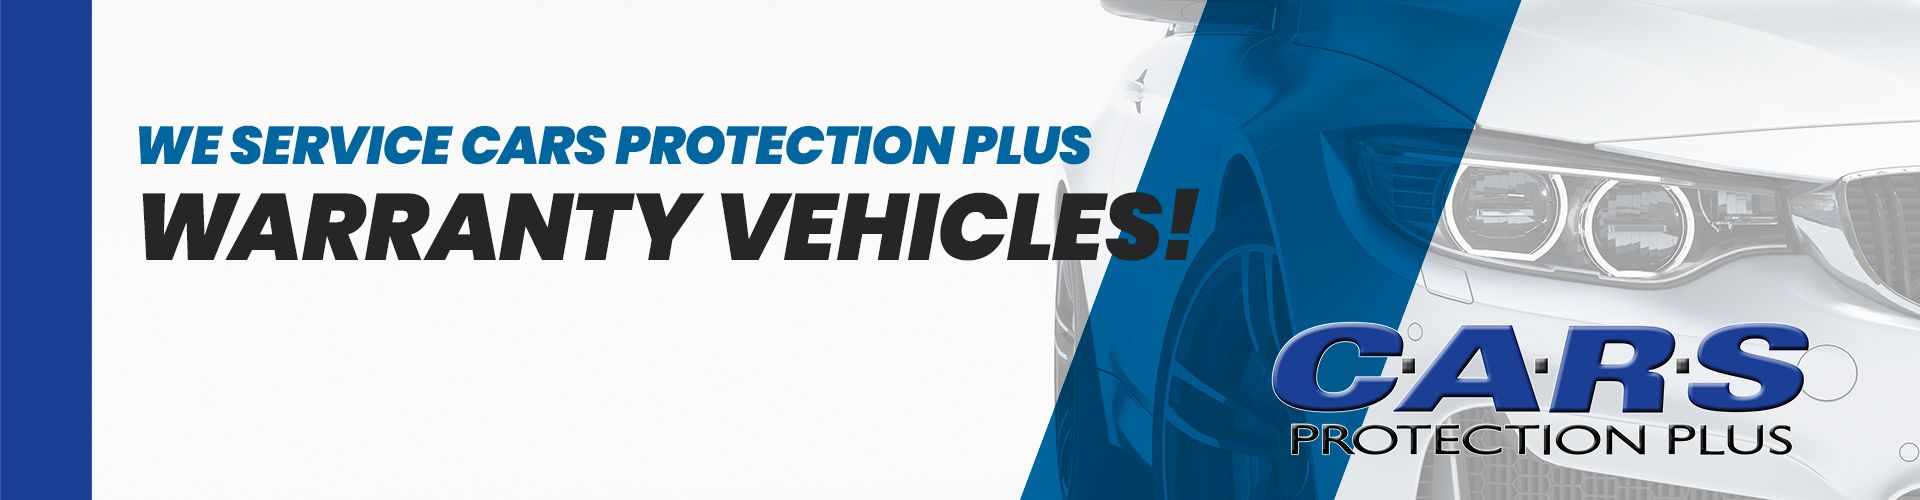 We Service Cars Protection Plus Warranty Vehicles!